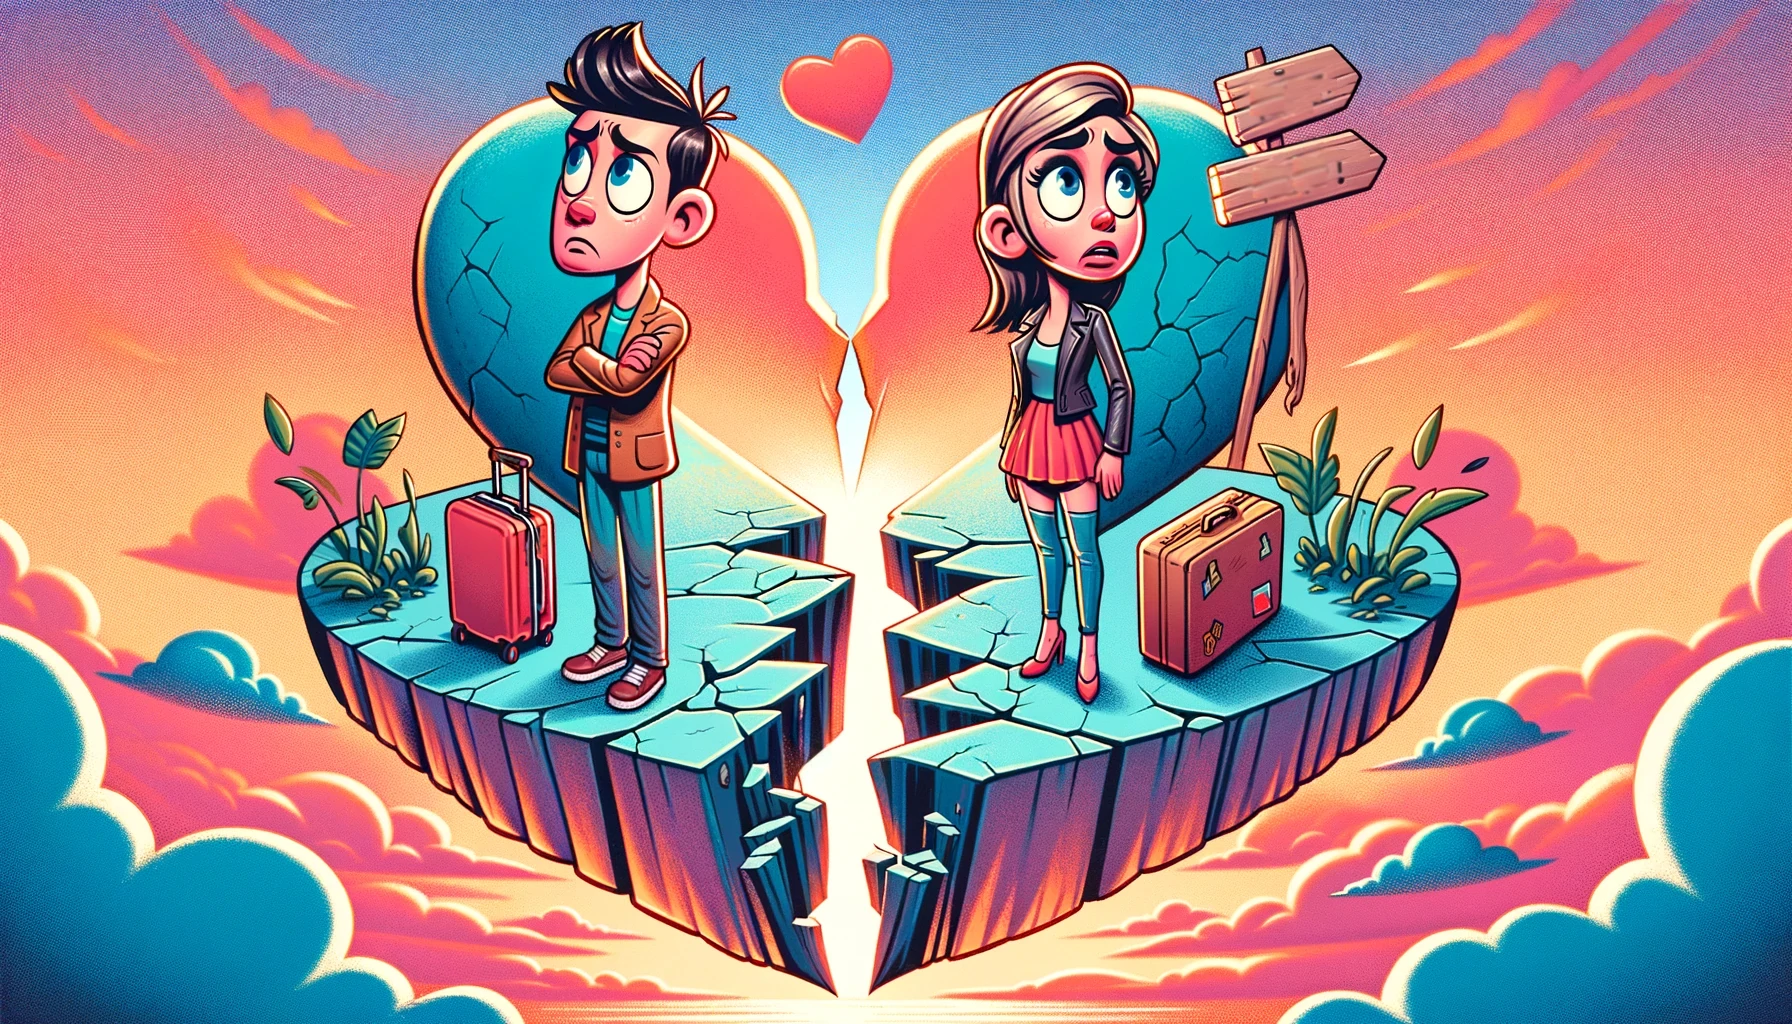 couple standing on opposite sides of a cracked heart-shaped island, each holding a suitcase, thinking about breaking up